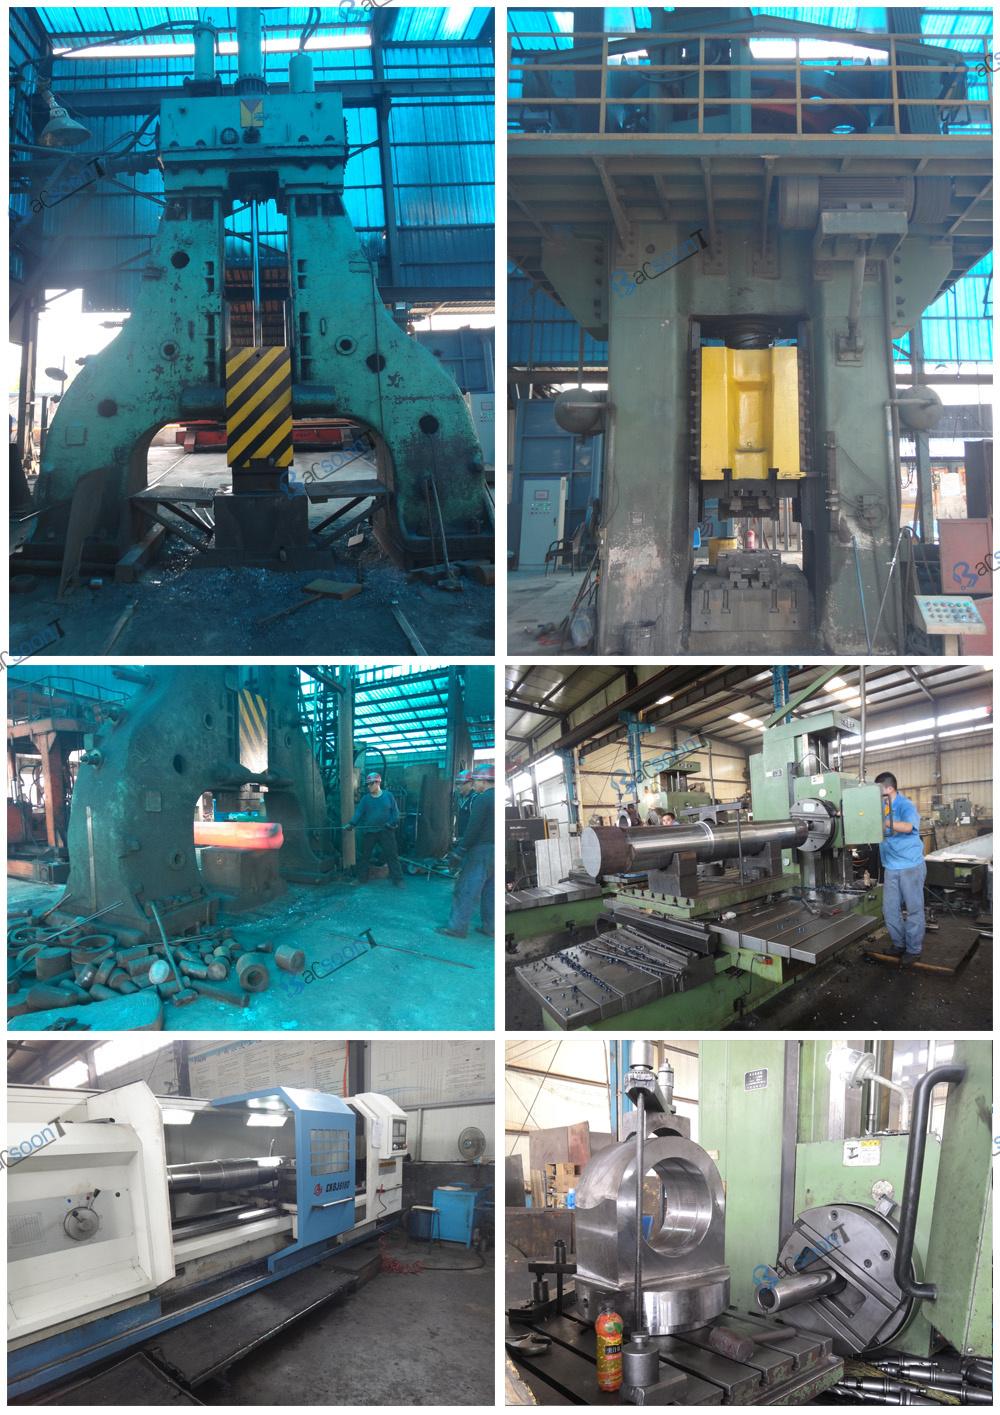 Forging Steel Track Roller/Bottom Roller for Engineering Machinery